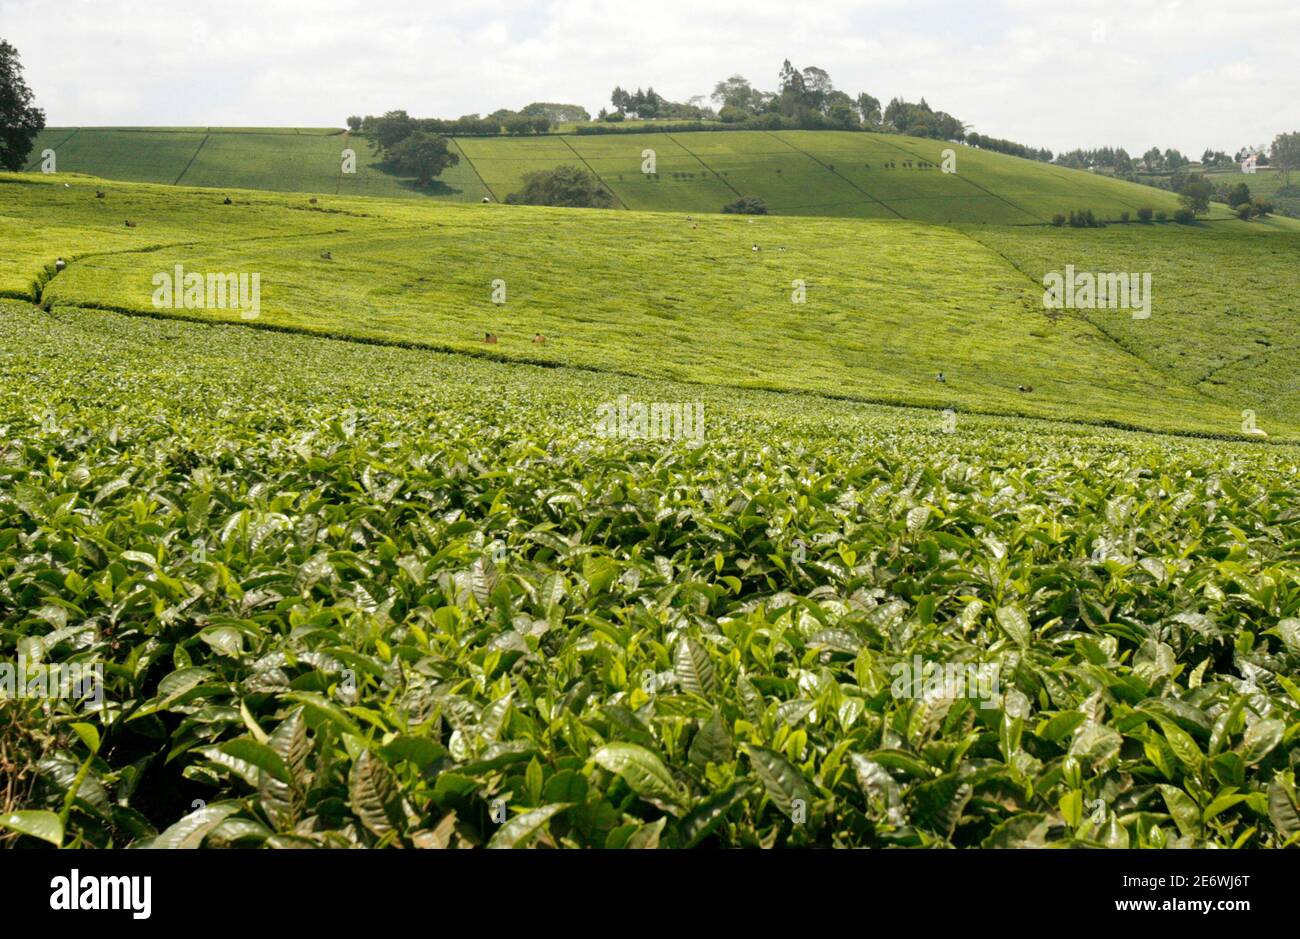 A view of a tea plantation in Tigoni, 40km (25 miles) west of Kenya's capital Nairobi, August 28, 2009. Kenya traders expect tea prices to return to normal by the end of the year from record highs on forecasts the drought-stricken east African country will get above average rainfall soon, the head of a trade body said on Friday. REUTERS/Thomas Mukoya (KENYA ENVIRONMENT BUSINESS) Stock Photo